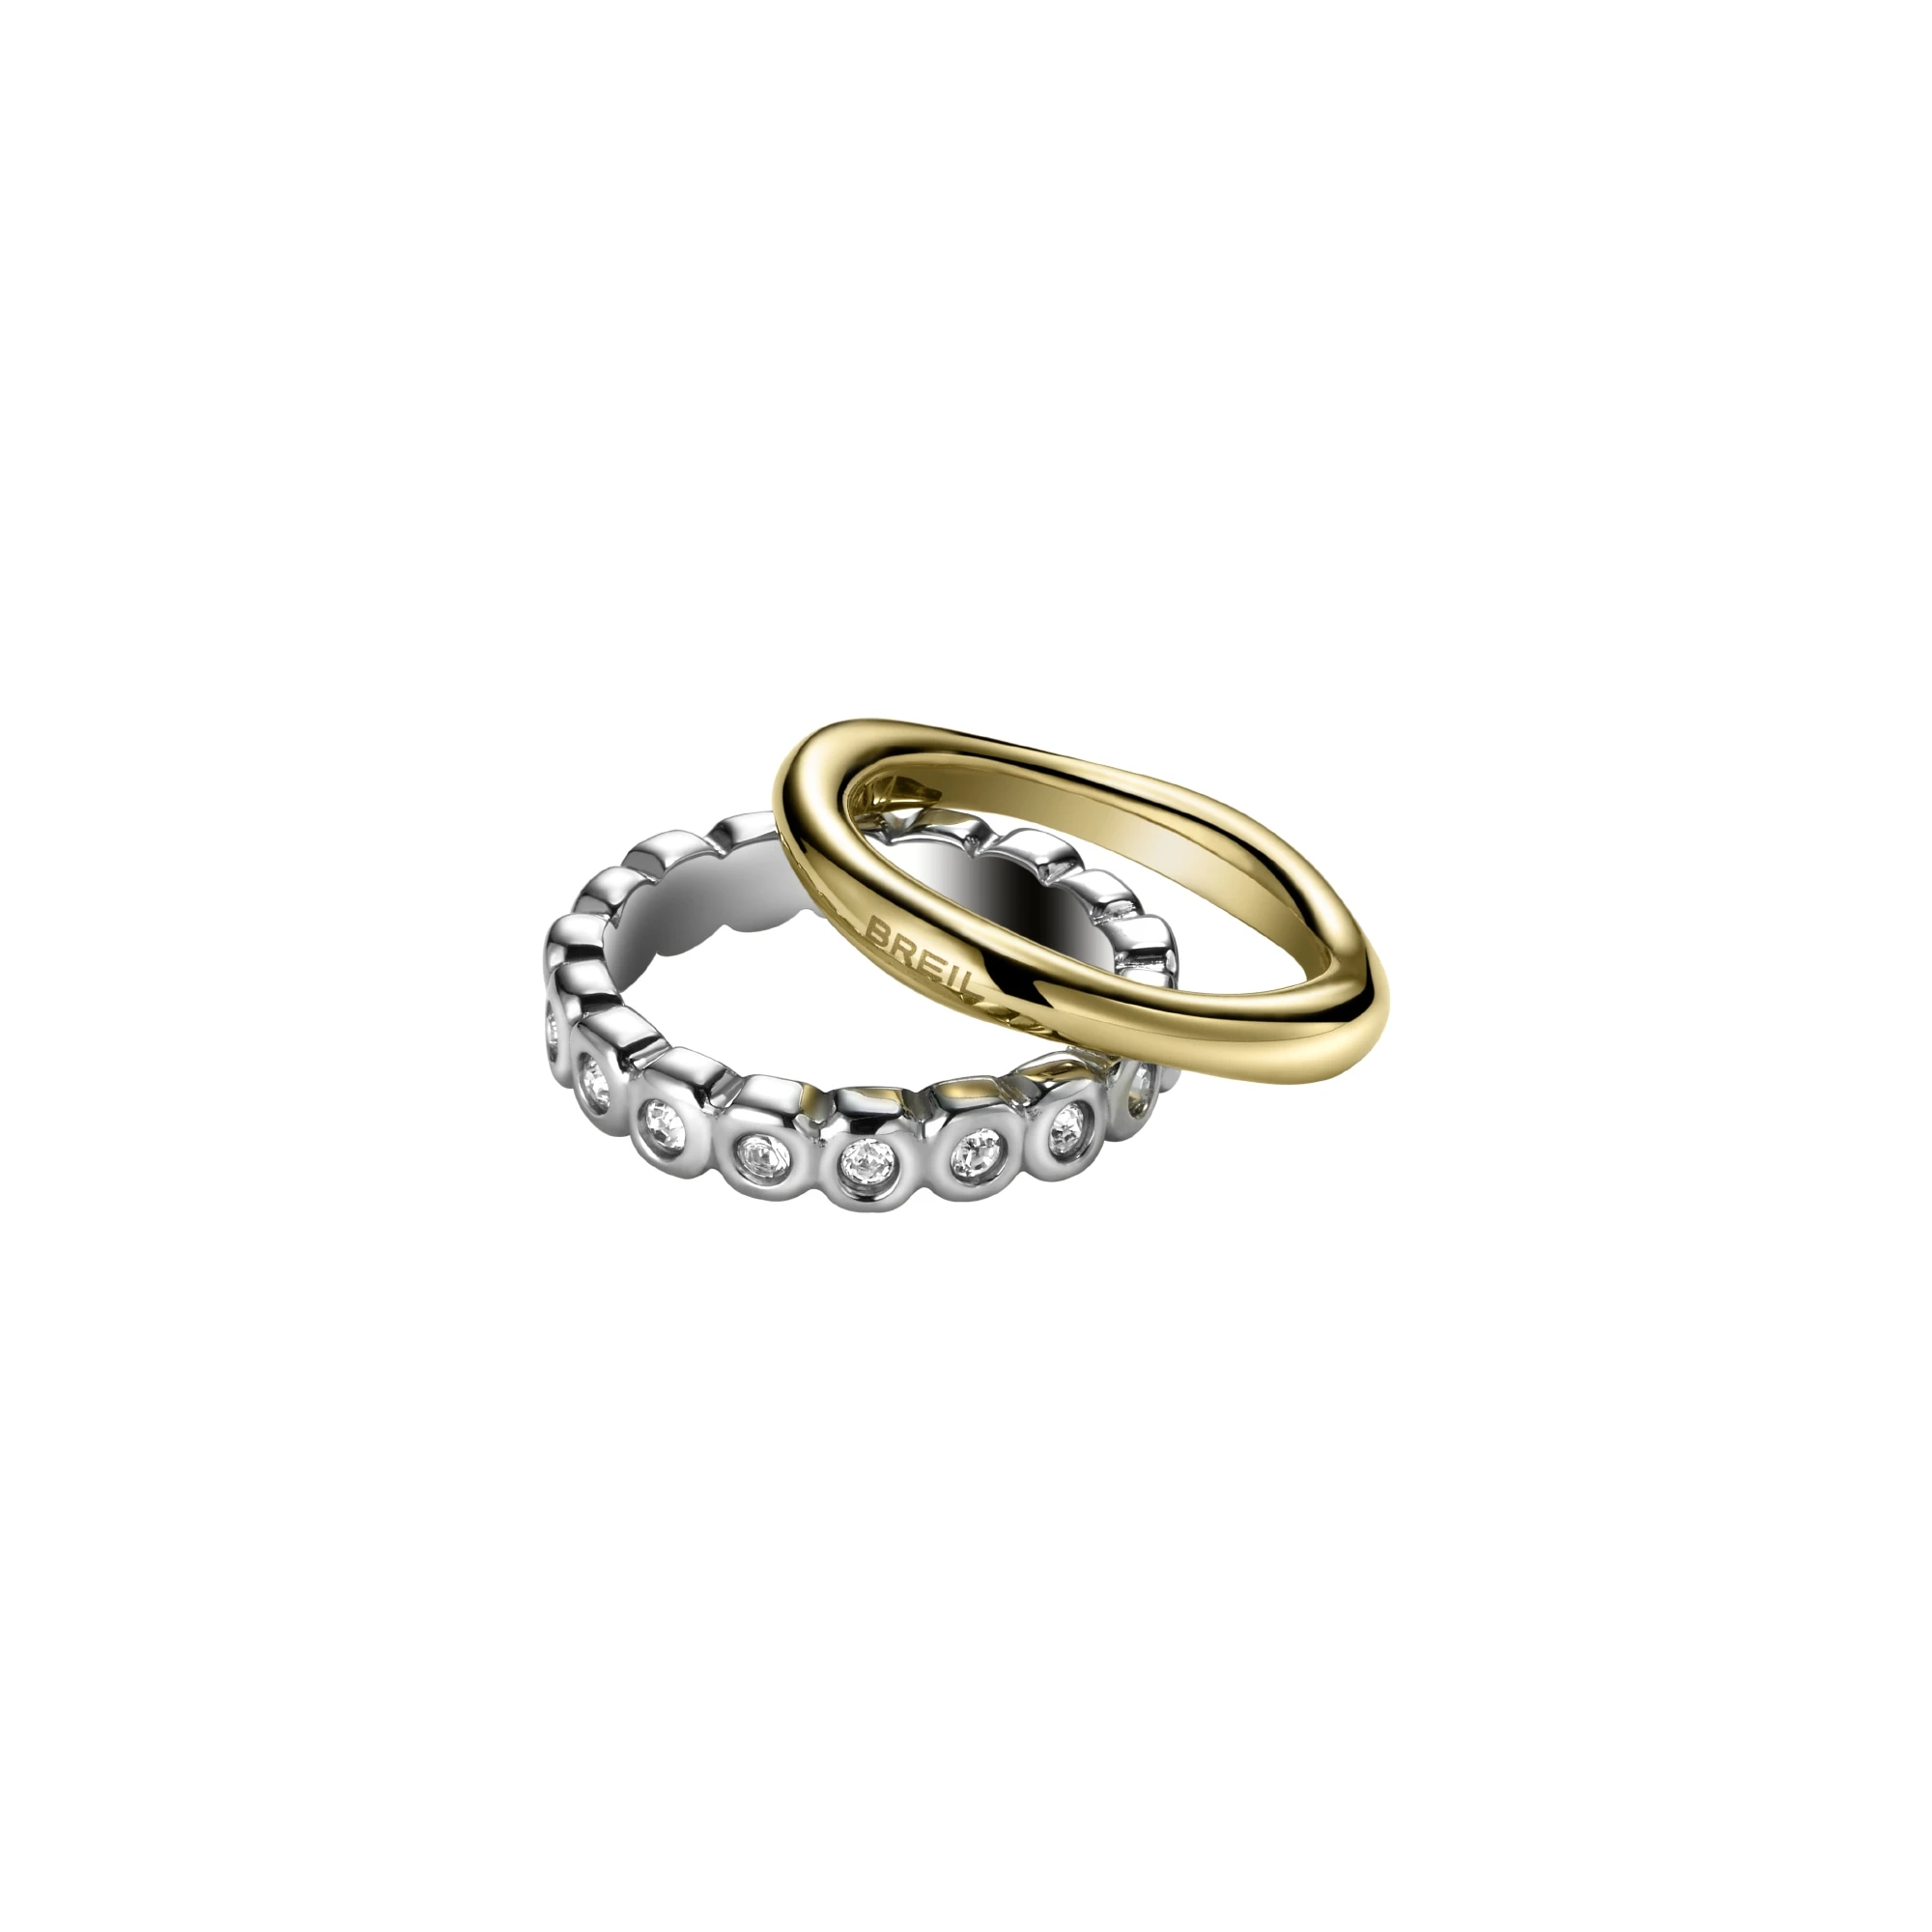 ROLLING DIAMONDS - RING WITH GOLD IP DETAIL AND WHITE CRYSTALS - 1 - TJ1544 | Breil